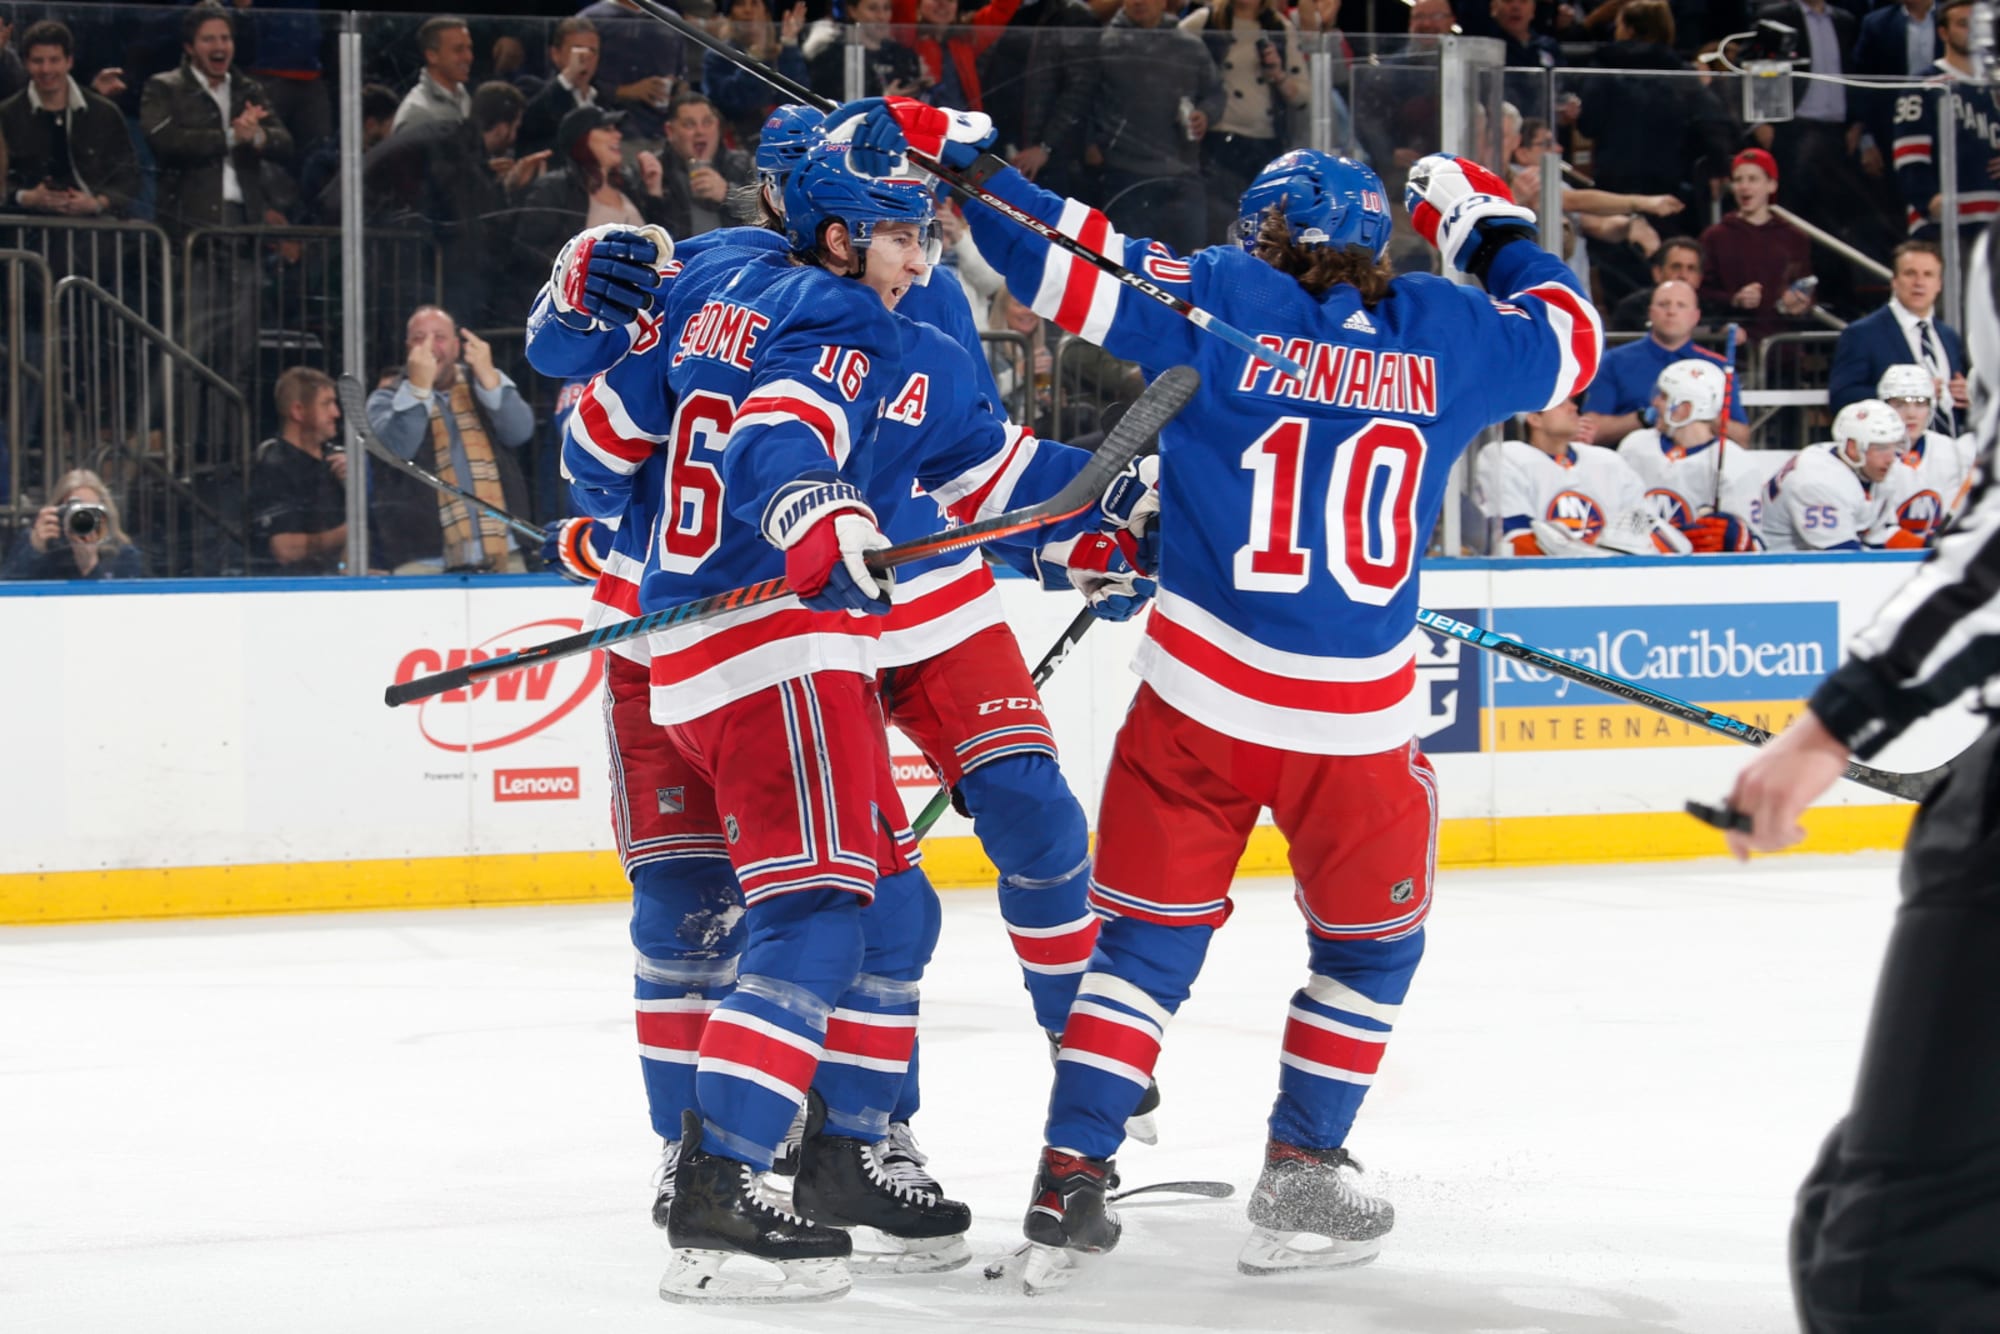 New York Rangers playoff chances ride on this sixgame stretch